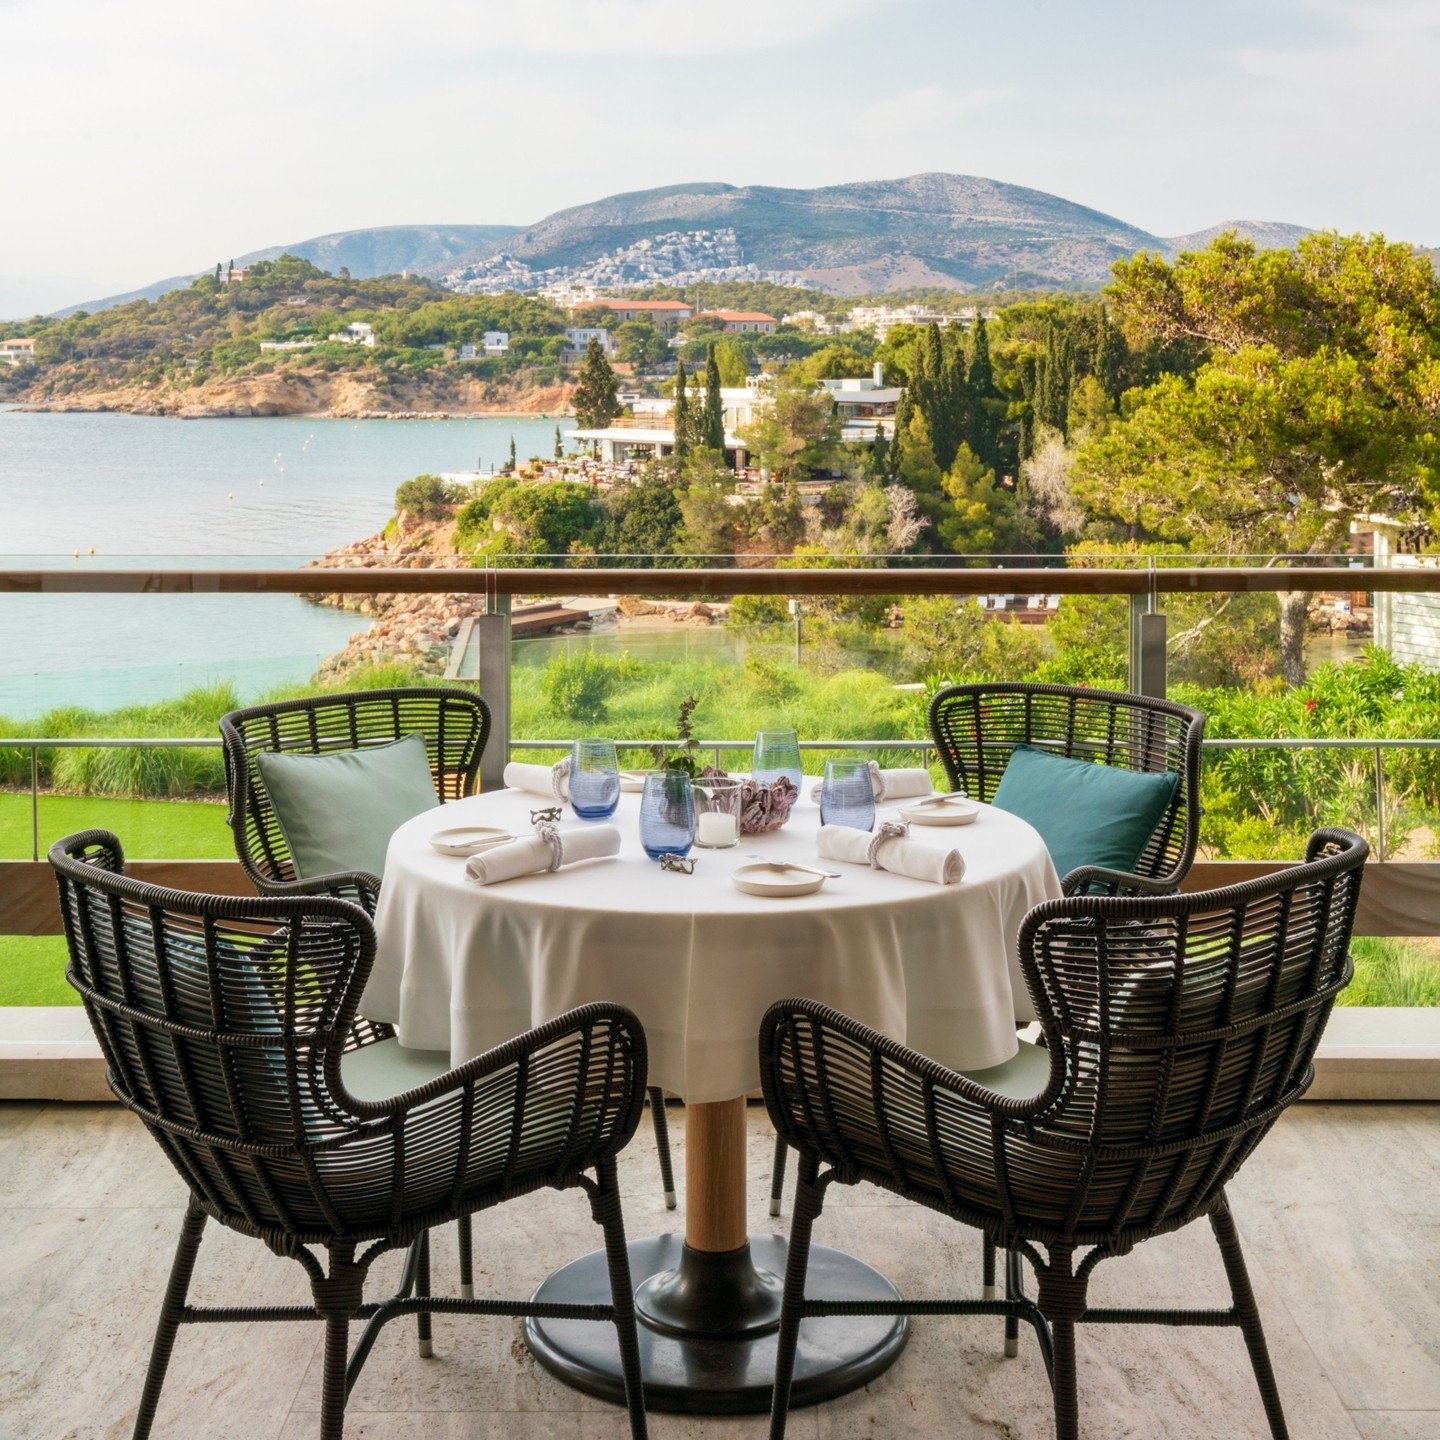 The enchanting view from Pelagos Terrace overlooking the Athenian Riviera